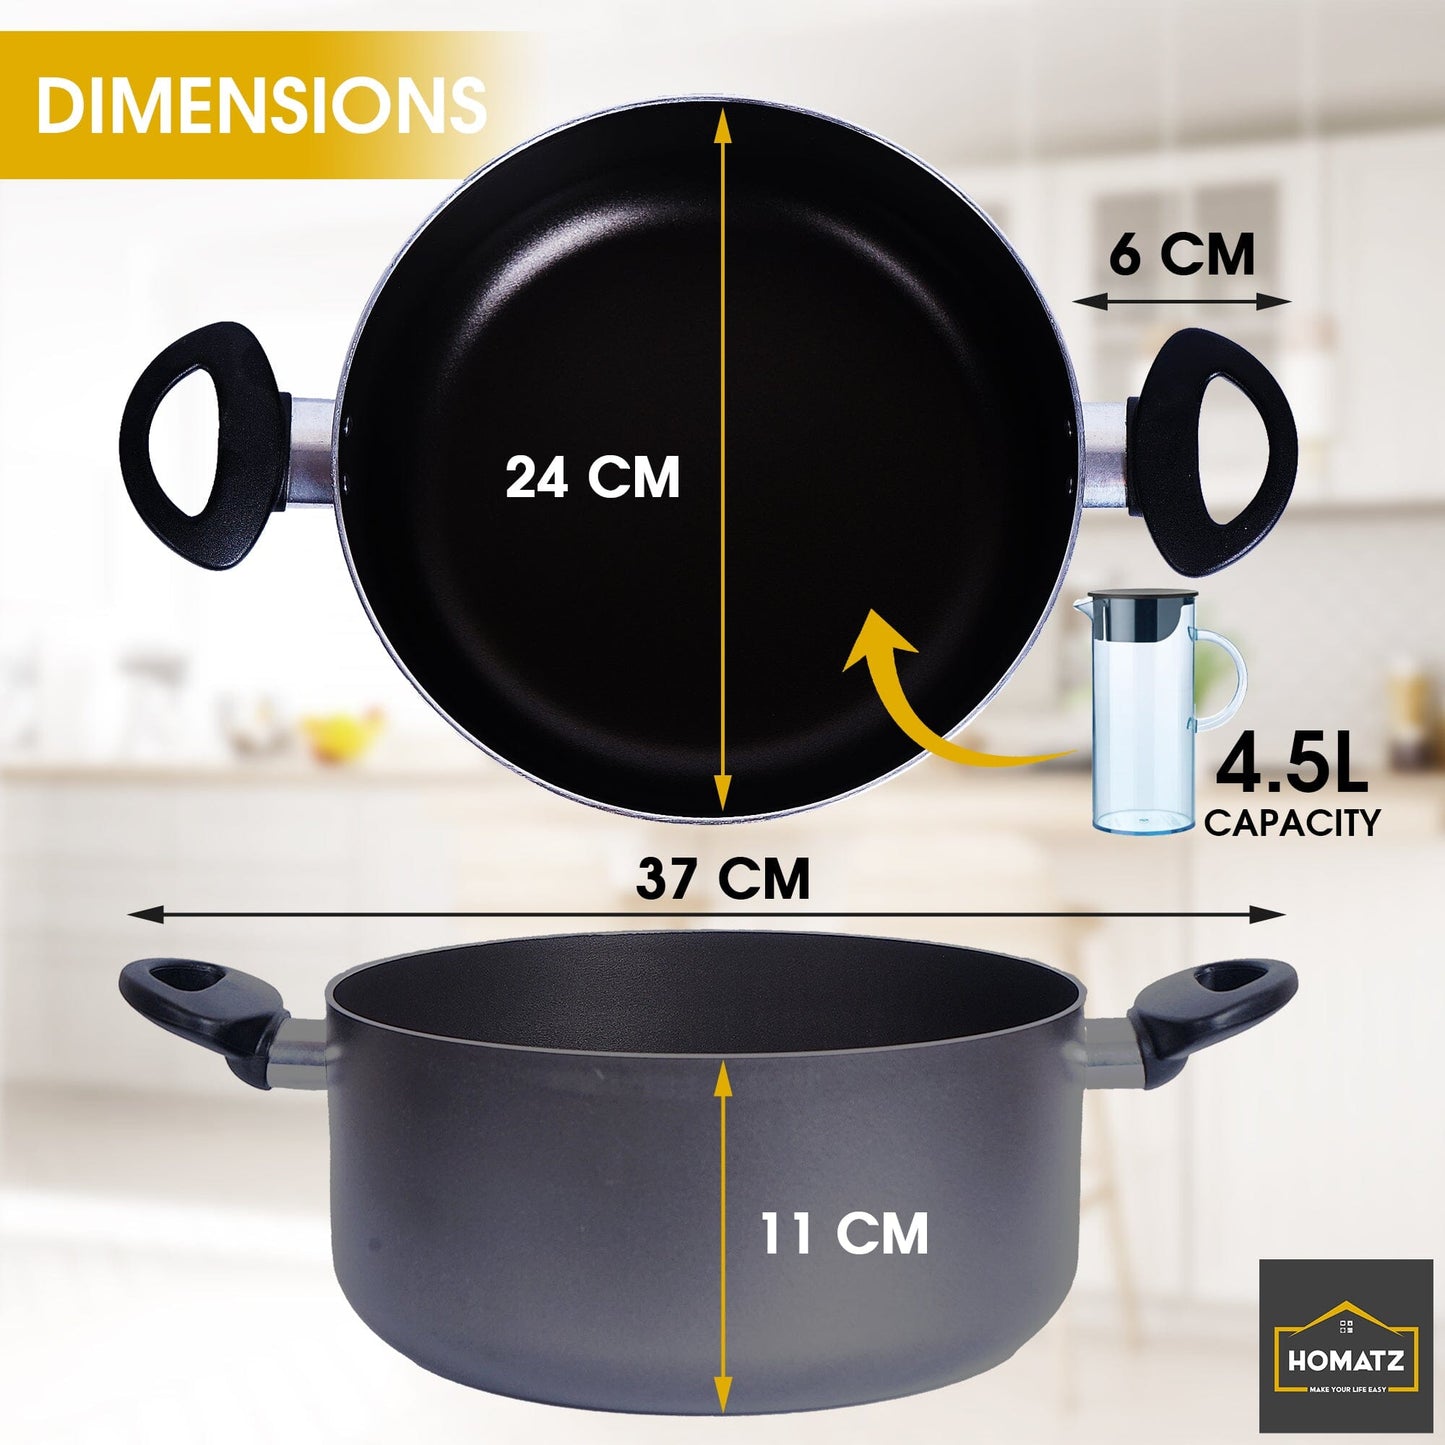 Stock Pot Non-Stick Kitchen Cooking Pot with Glass Lid and Silicon Trivet Mat - Induction Base Aluminum Pot Cooking Homatz 24cm Grey 